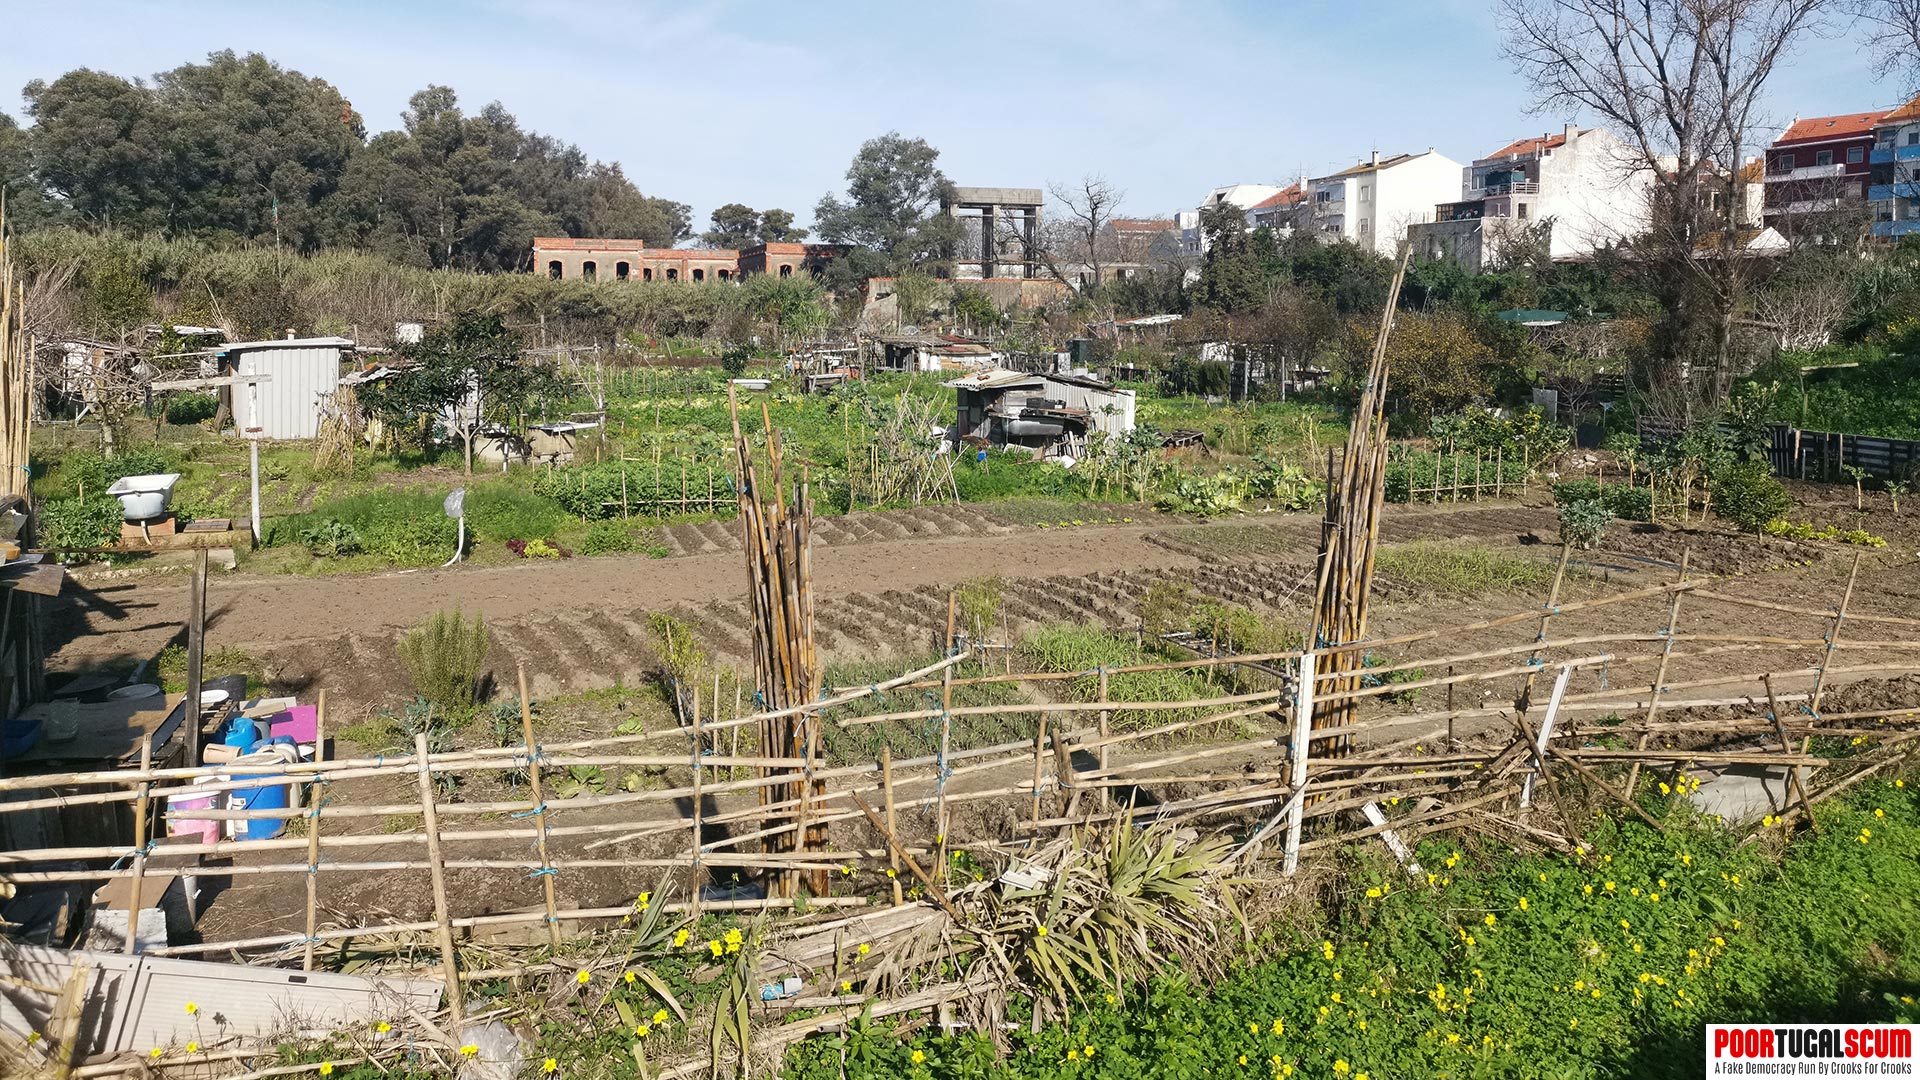 Private vegetable gardens at the entrance of a Portuguese city